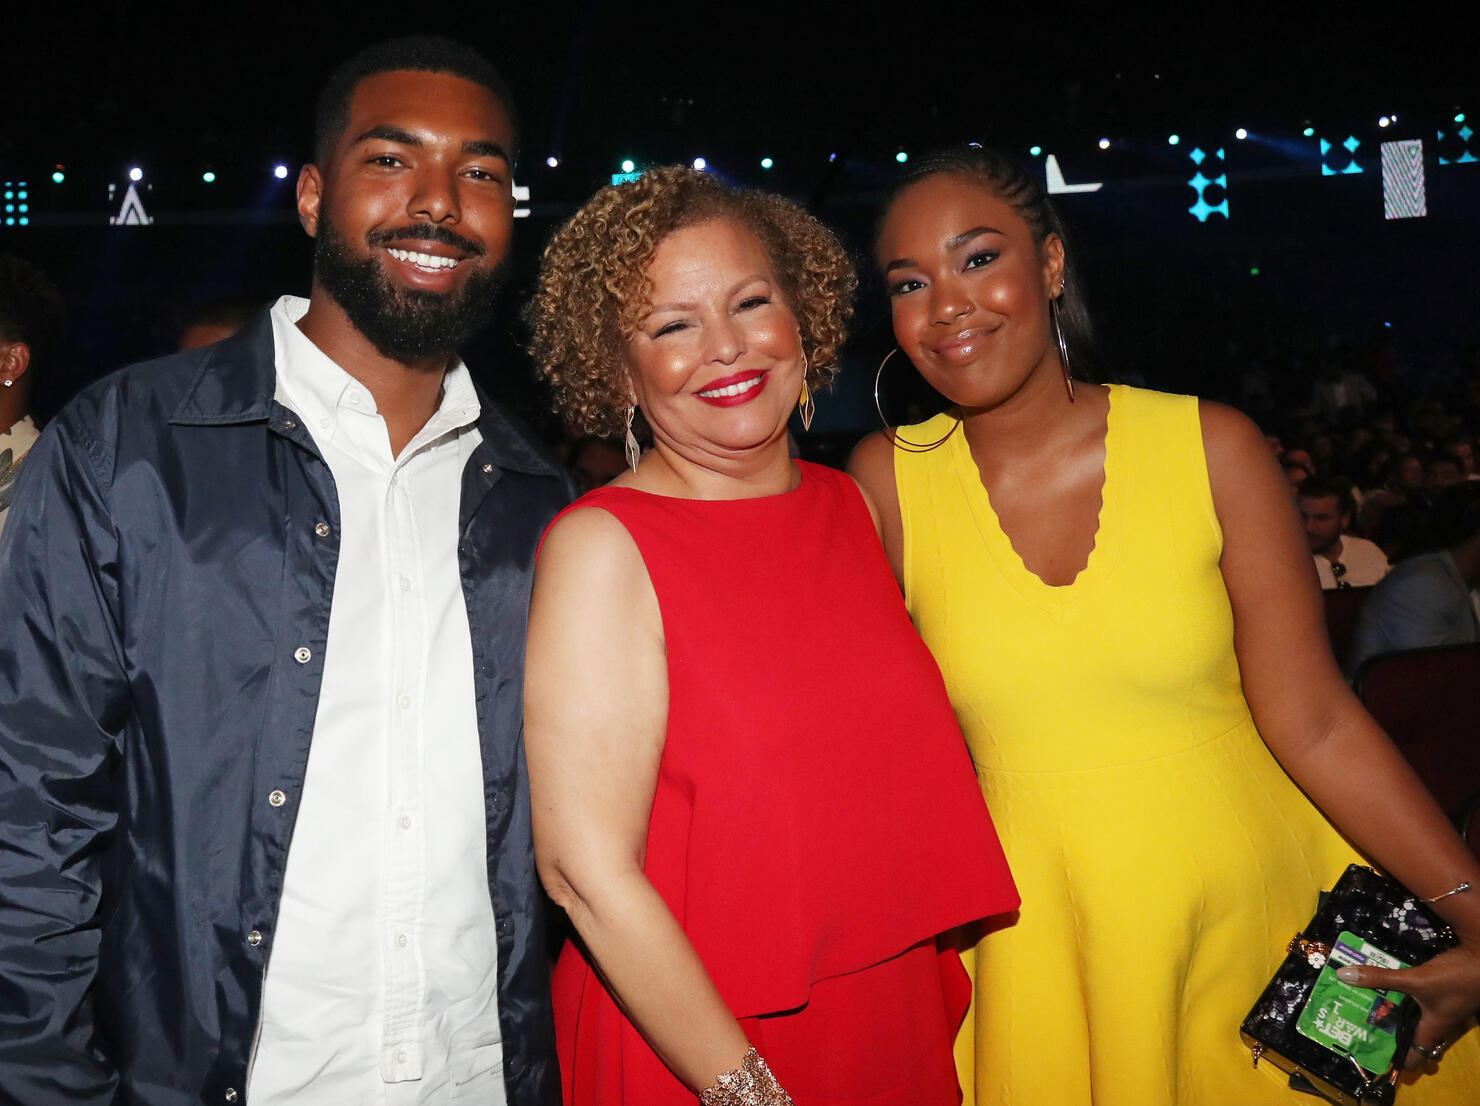 Son Of Former BET CEO Debra Lee Dies Suddenly At Age 31 | iHeart